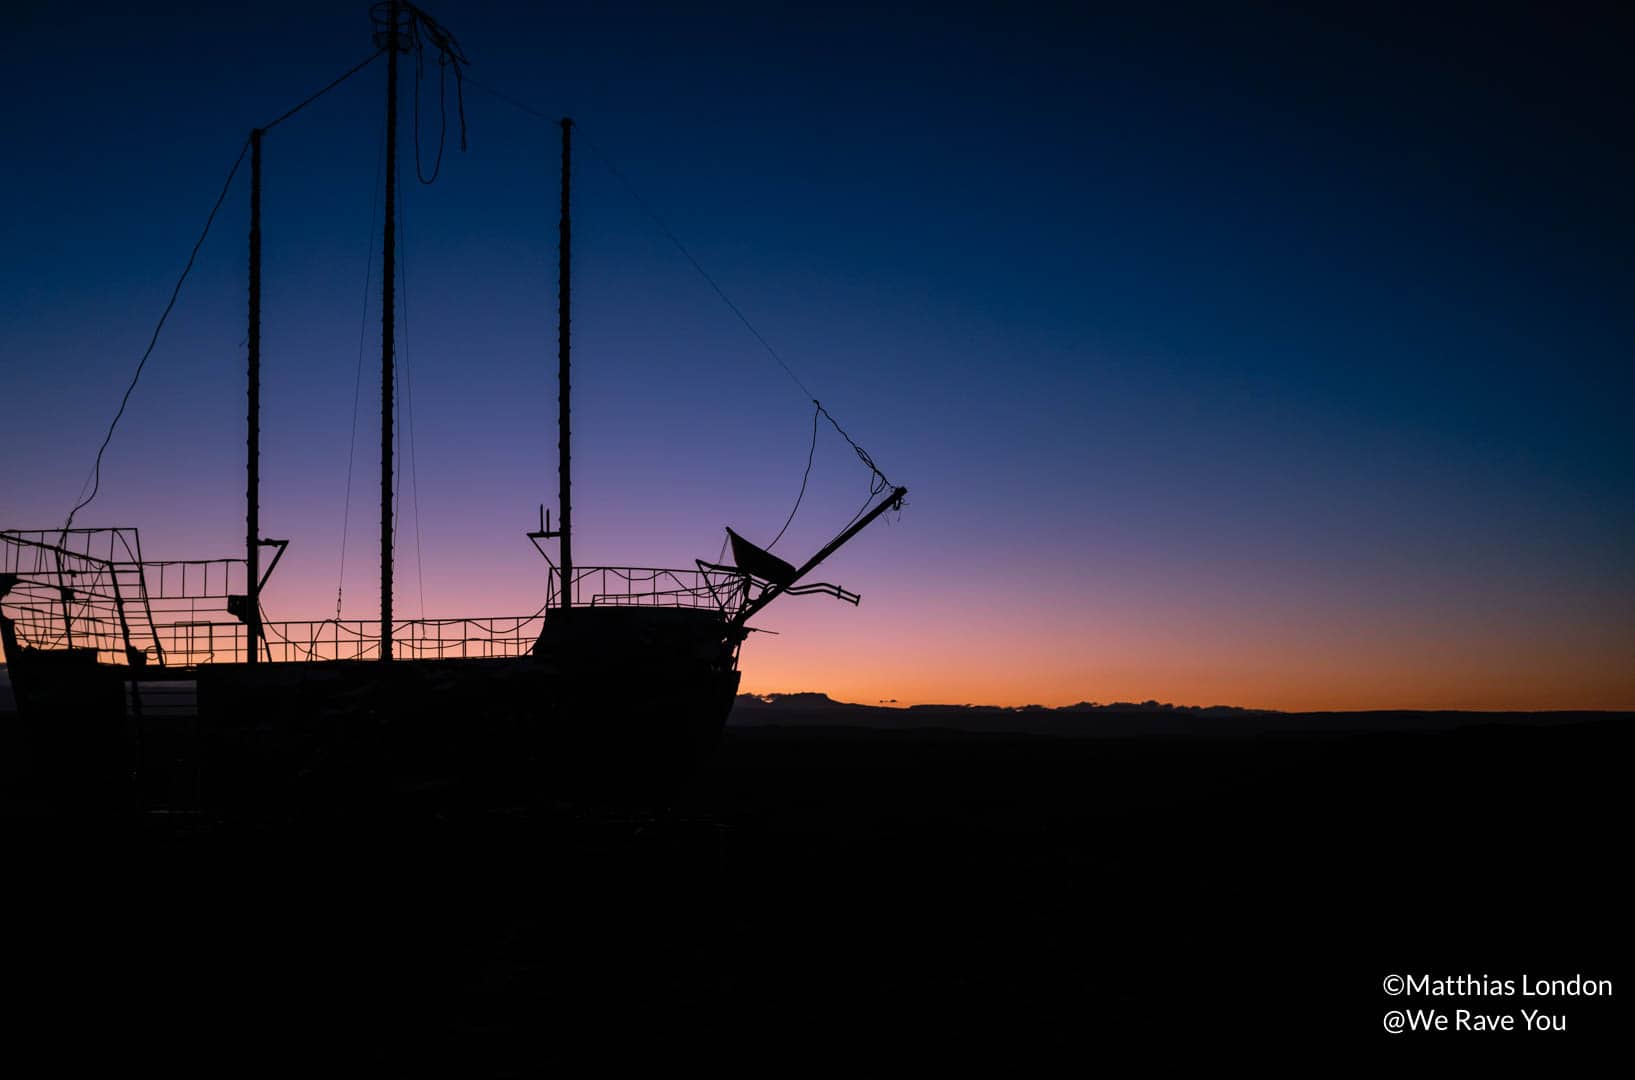 Return to the Source: Installation of a shipwreck in silhouette as photographed against the late-stage sunset.